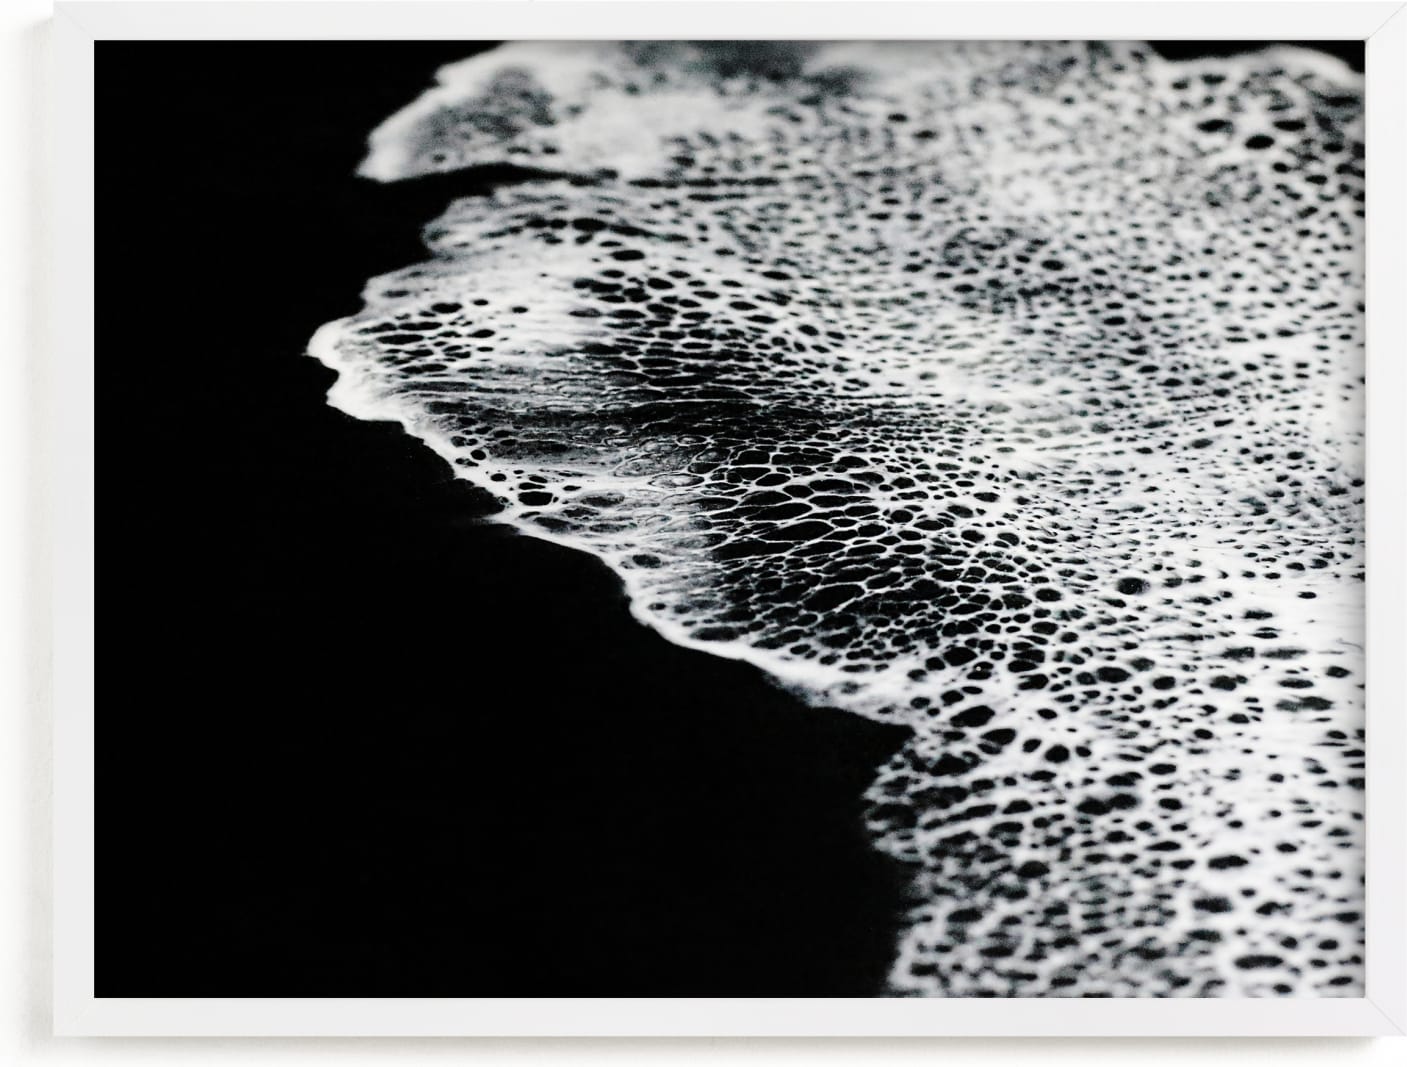 This is a black and white art by Christa Dominguez called Night Swim.